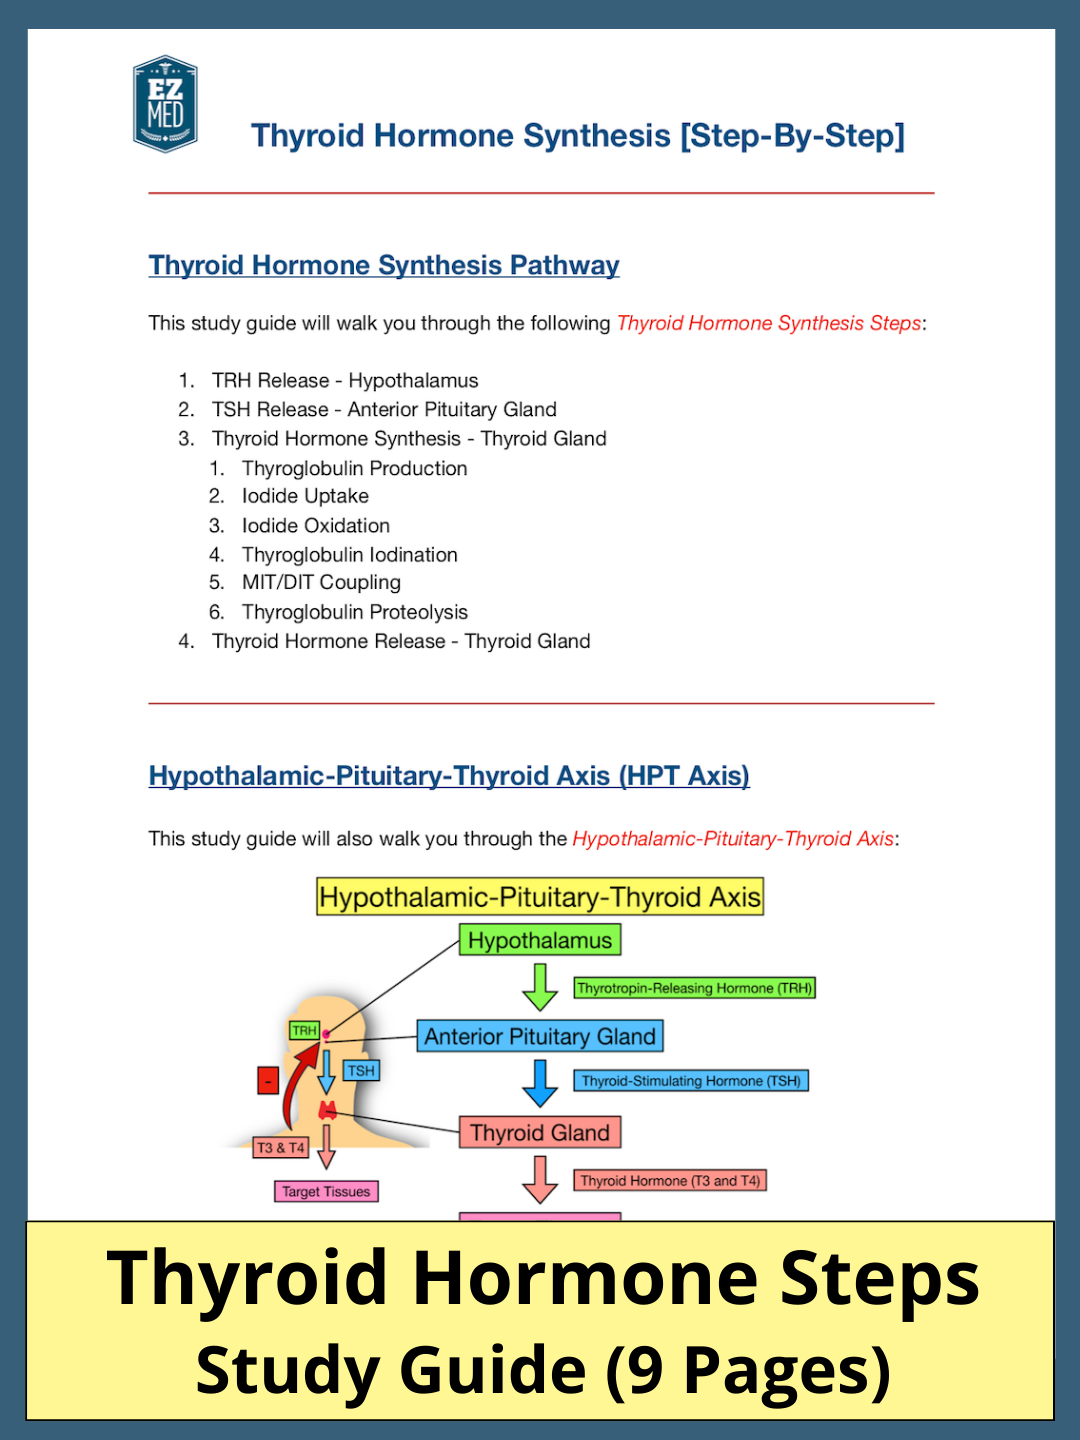 Thyroid Hormone Synthesis [Study Guide]